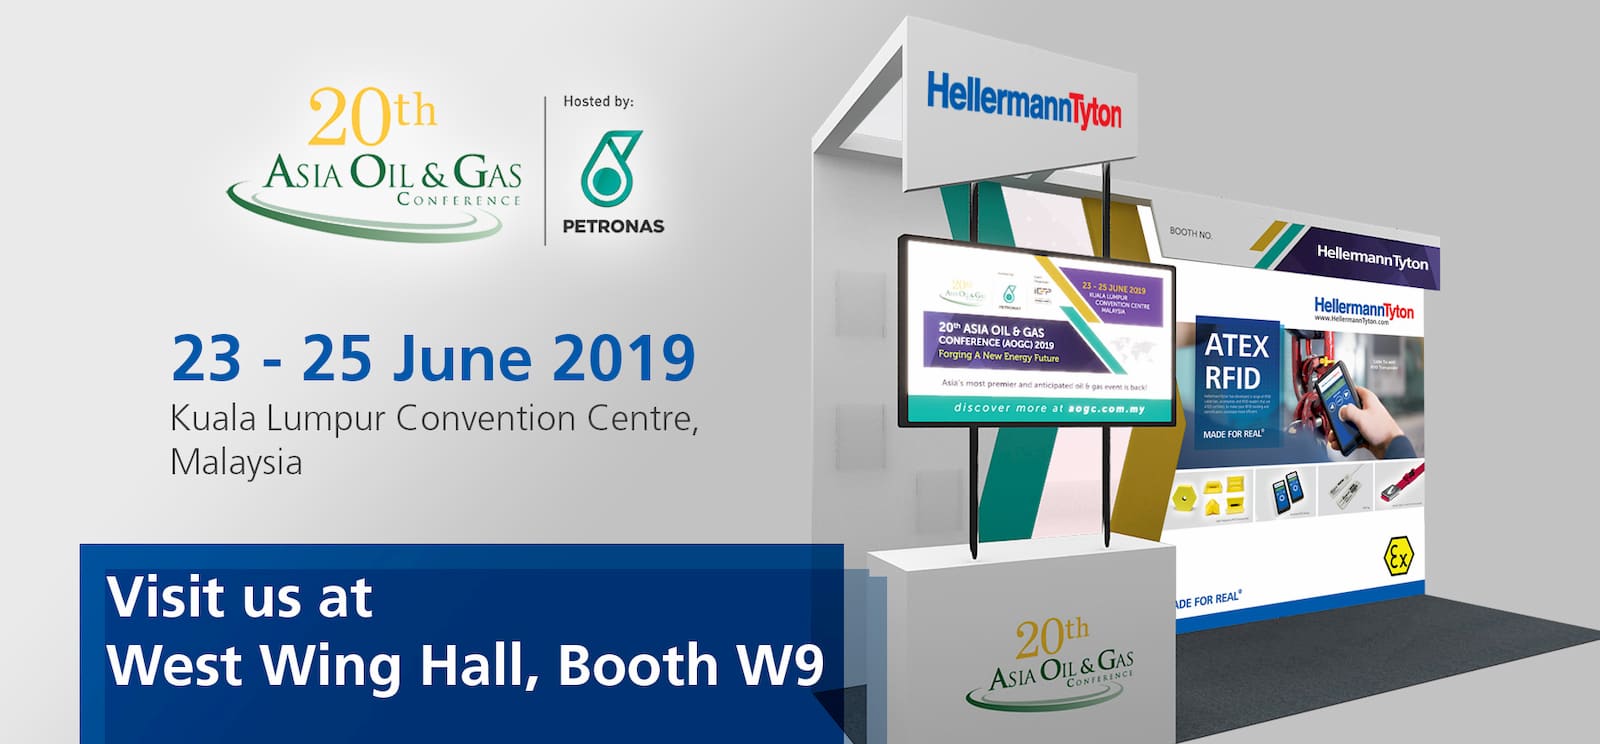 The Asia Oil & Gas Conference 2019